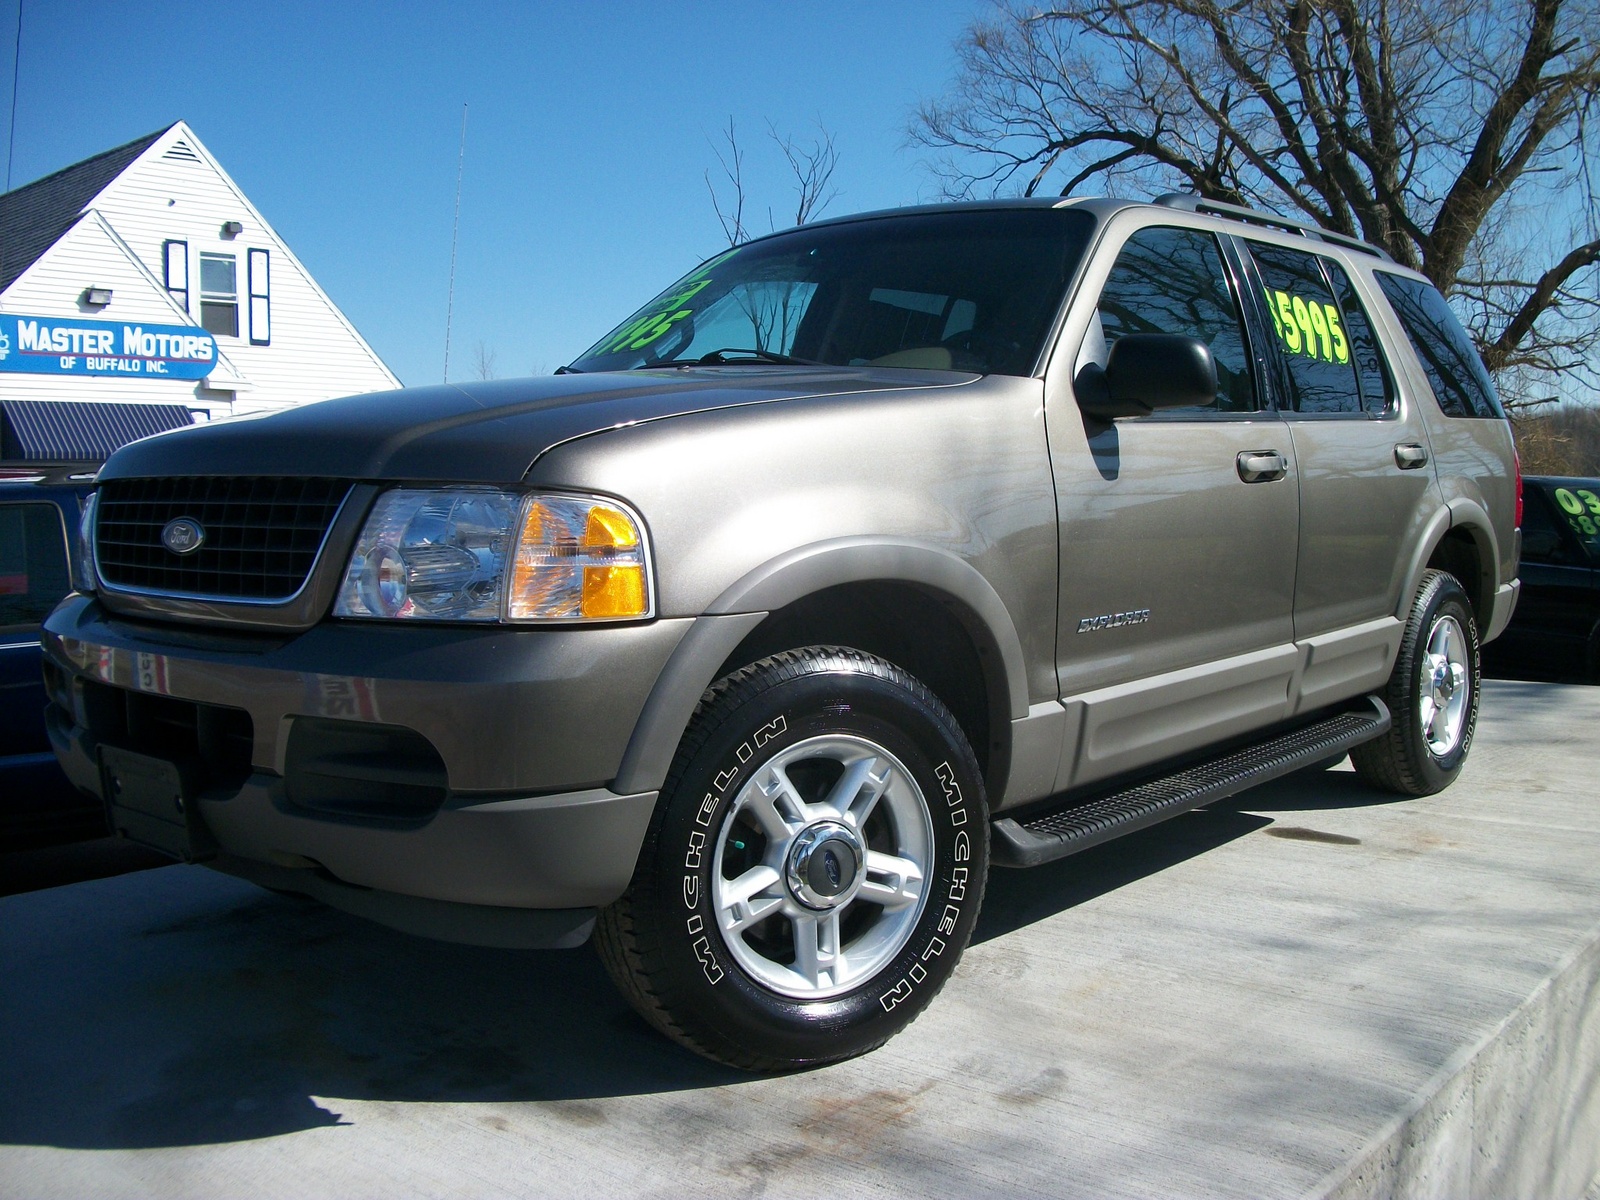 2002 Ford explorer limited reviews #10